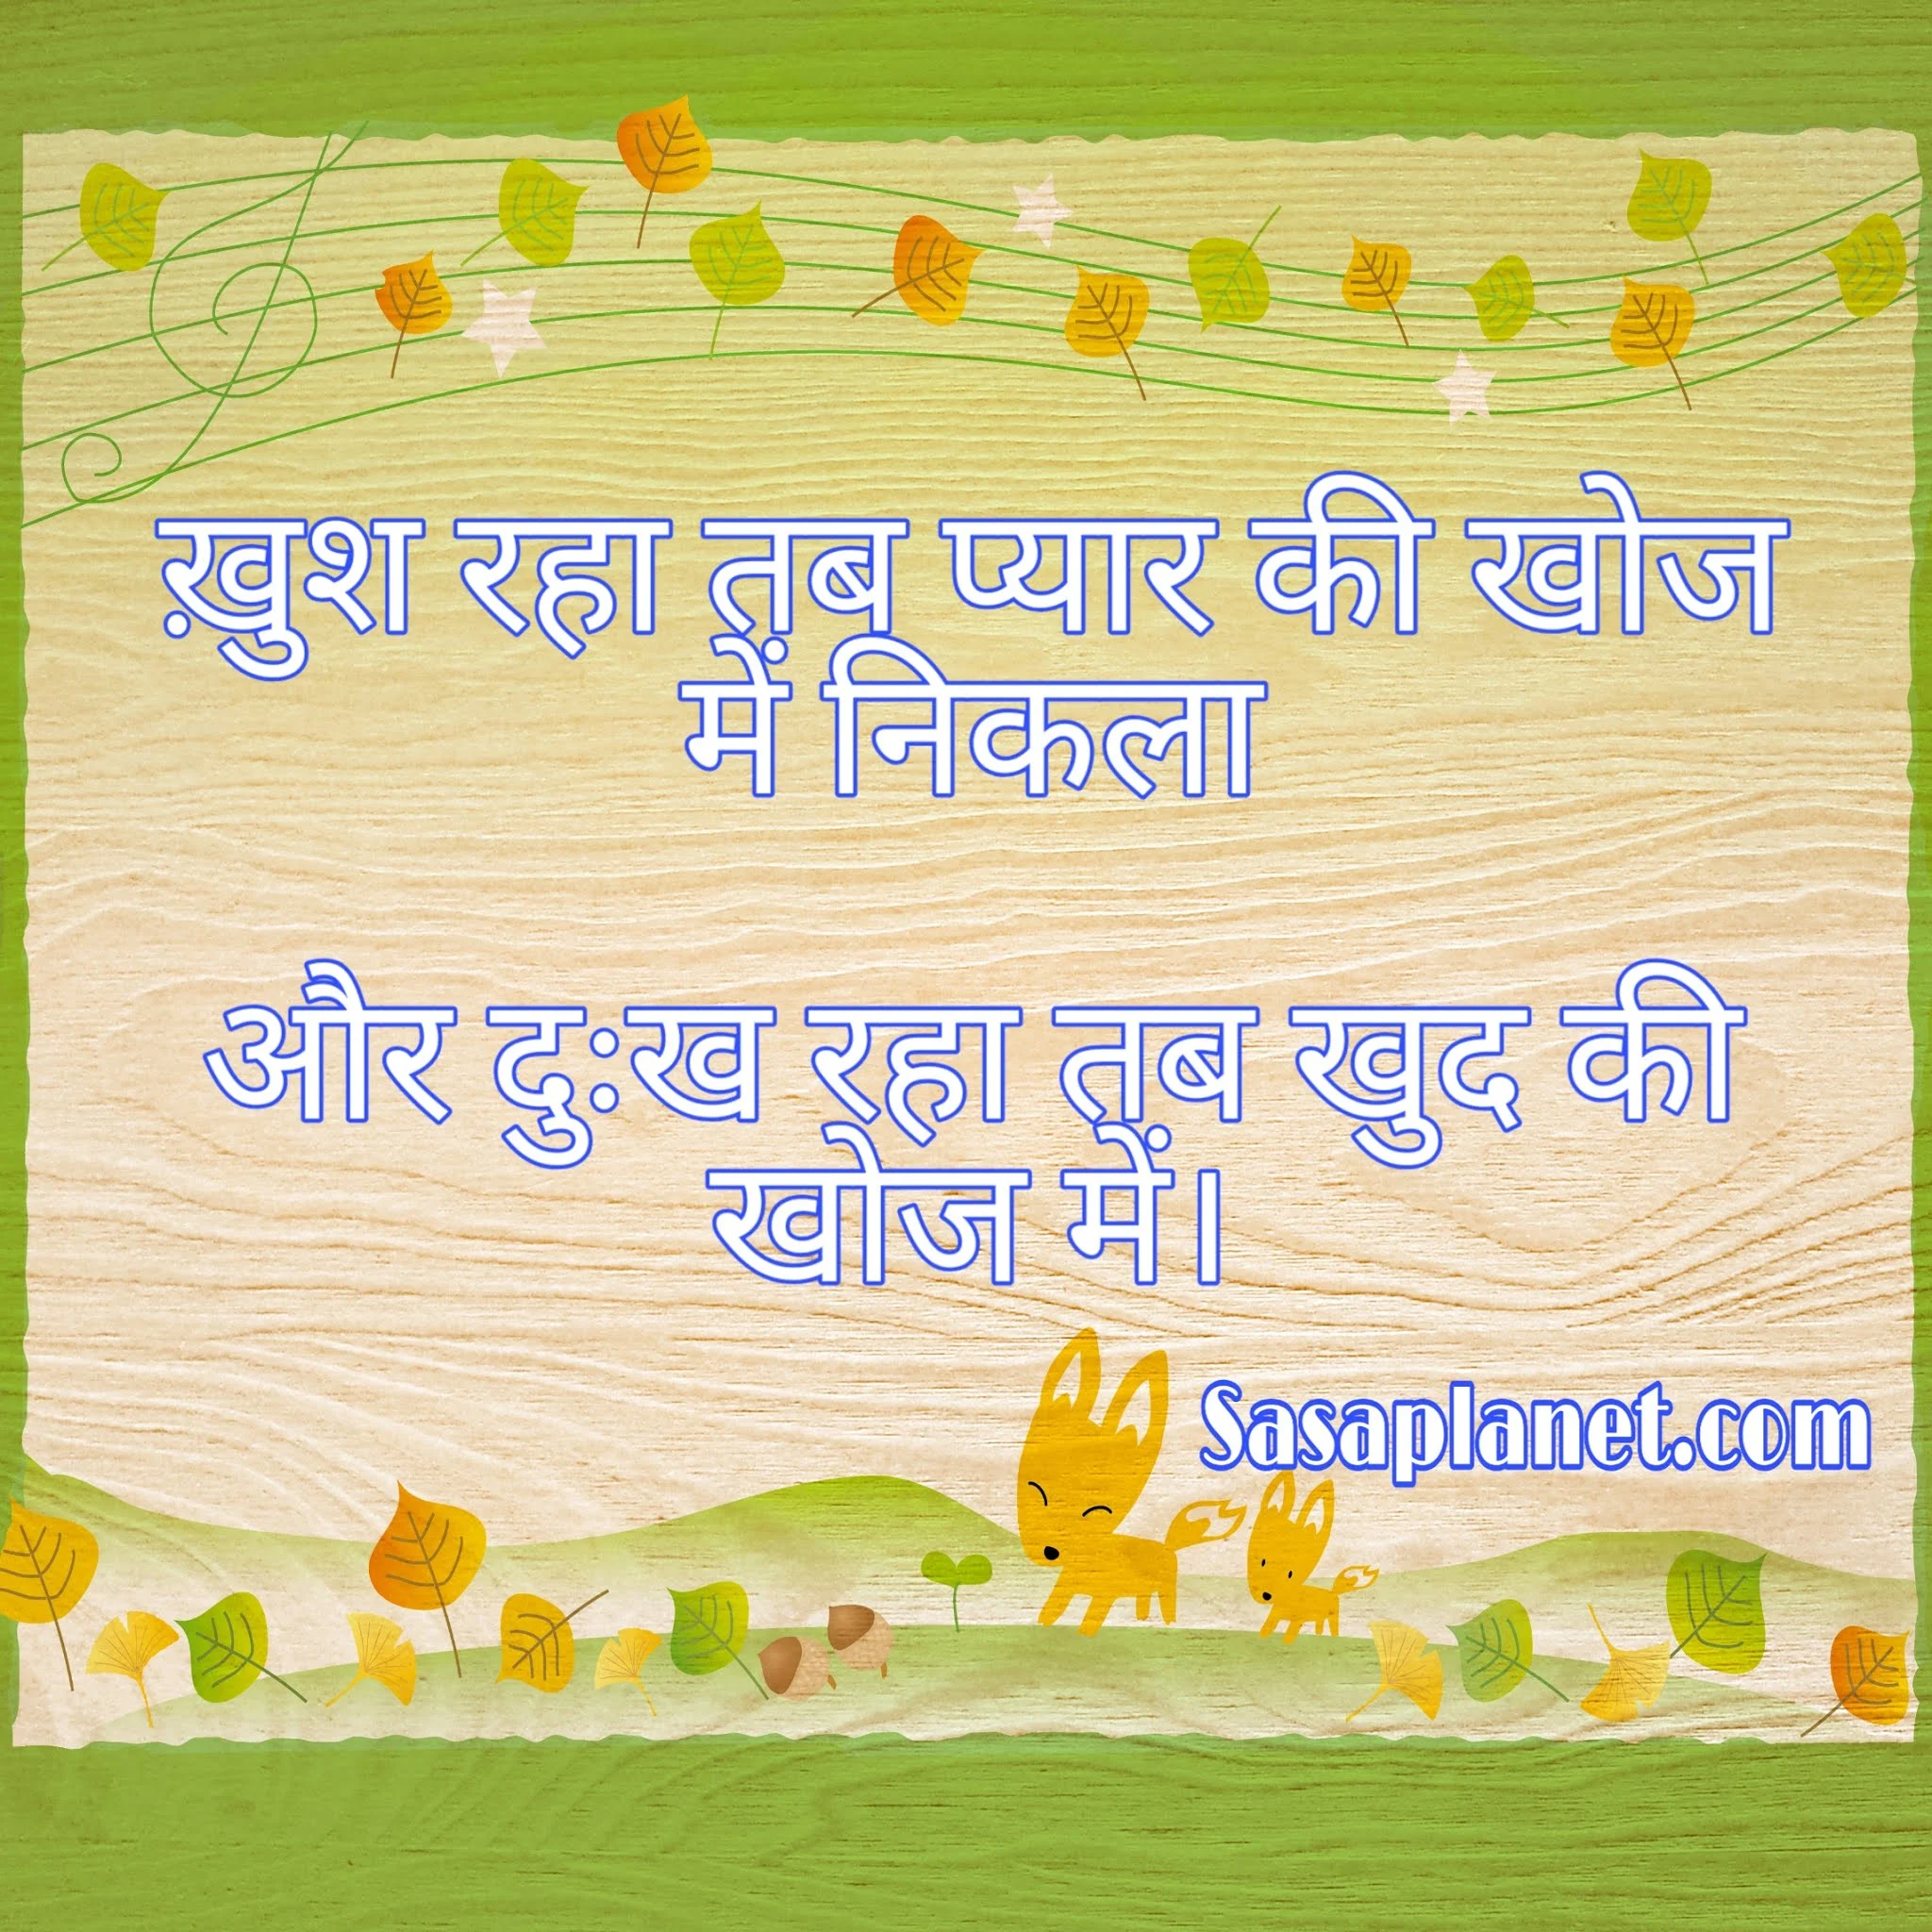 Life quote in Hindi